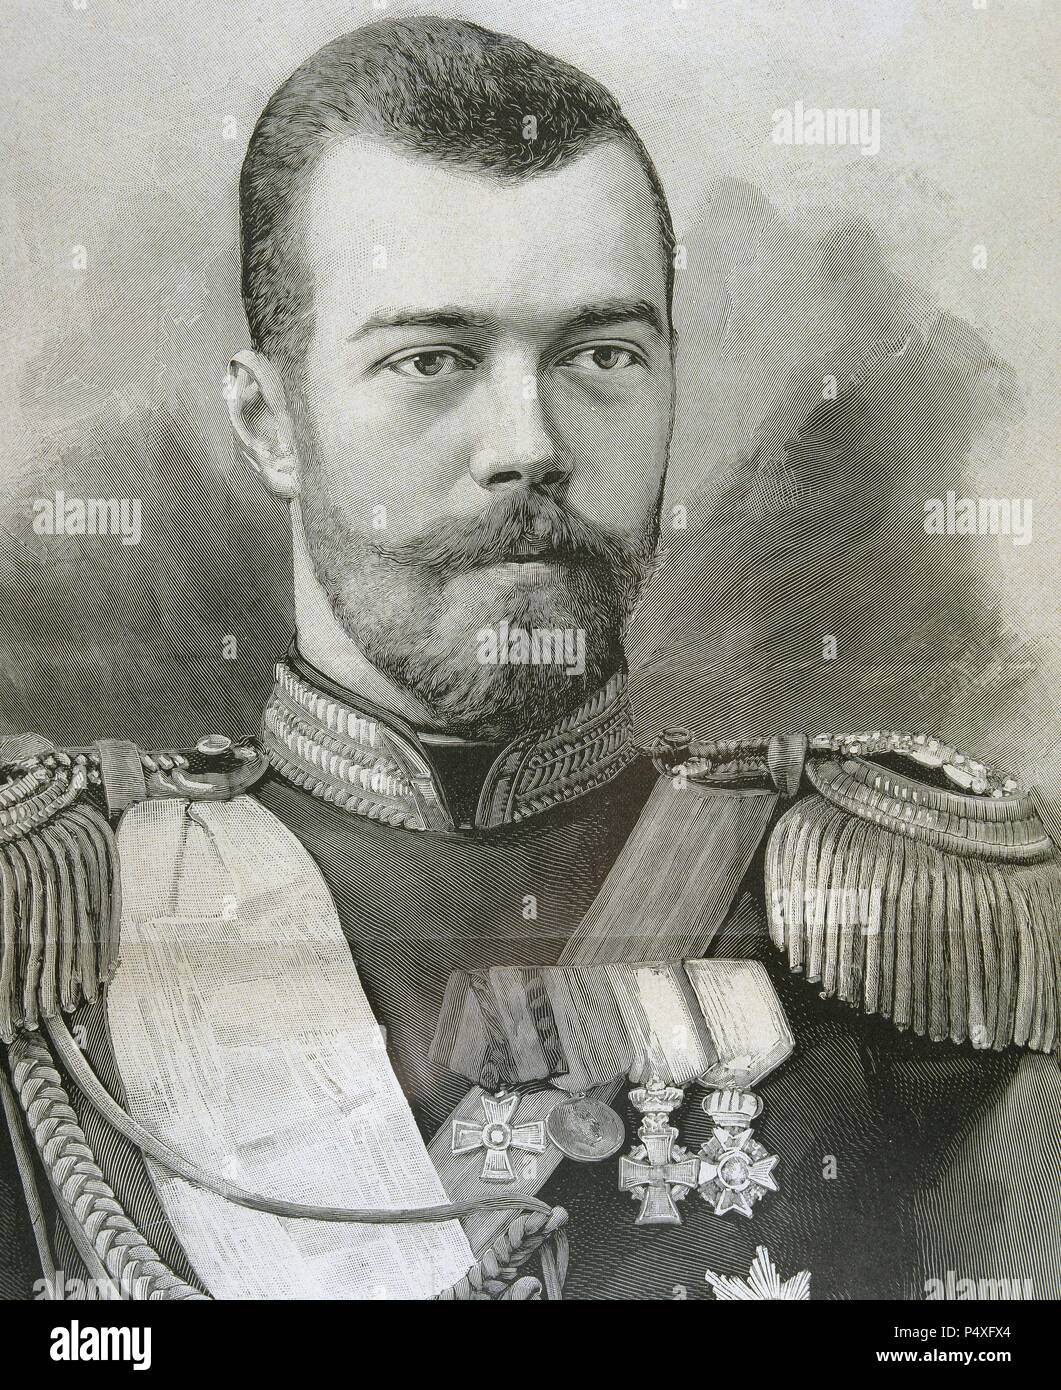 Nicholas II (1868-1918). Last Emperor of Russia, Grand Duke of Finland, and titular King of Poland. His official short title was Nicholas II, Emperor and Autocrat of All the Russias. Engraving. Stock Photo